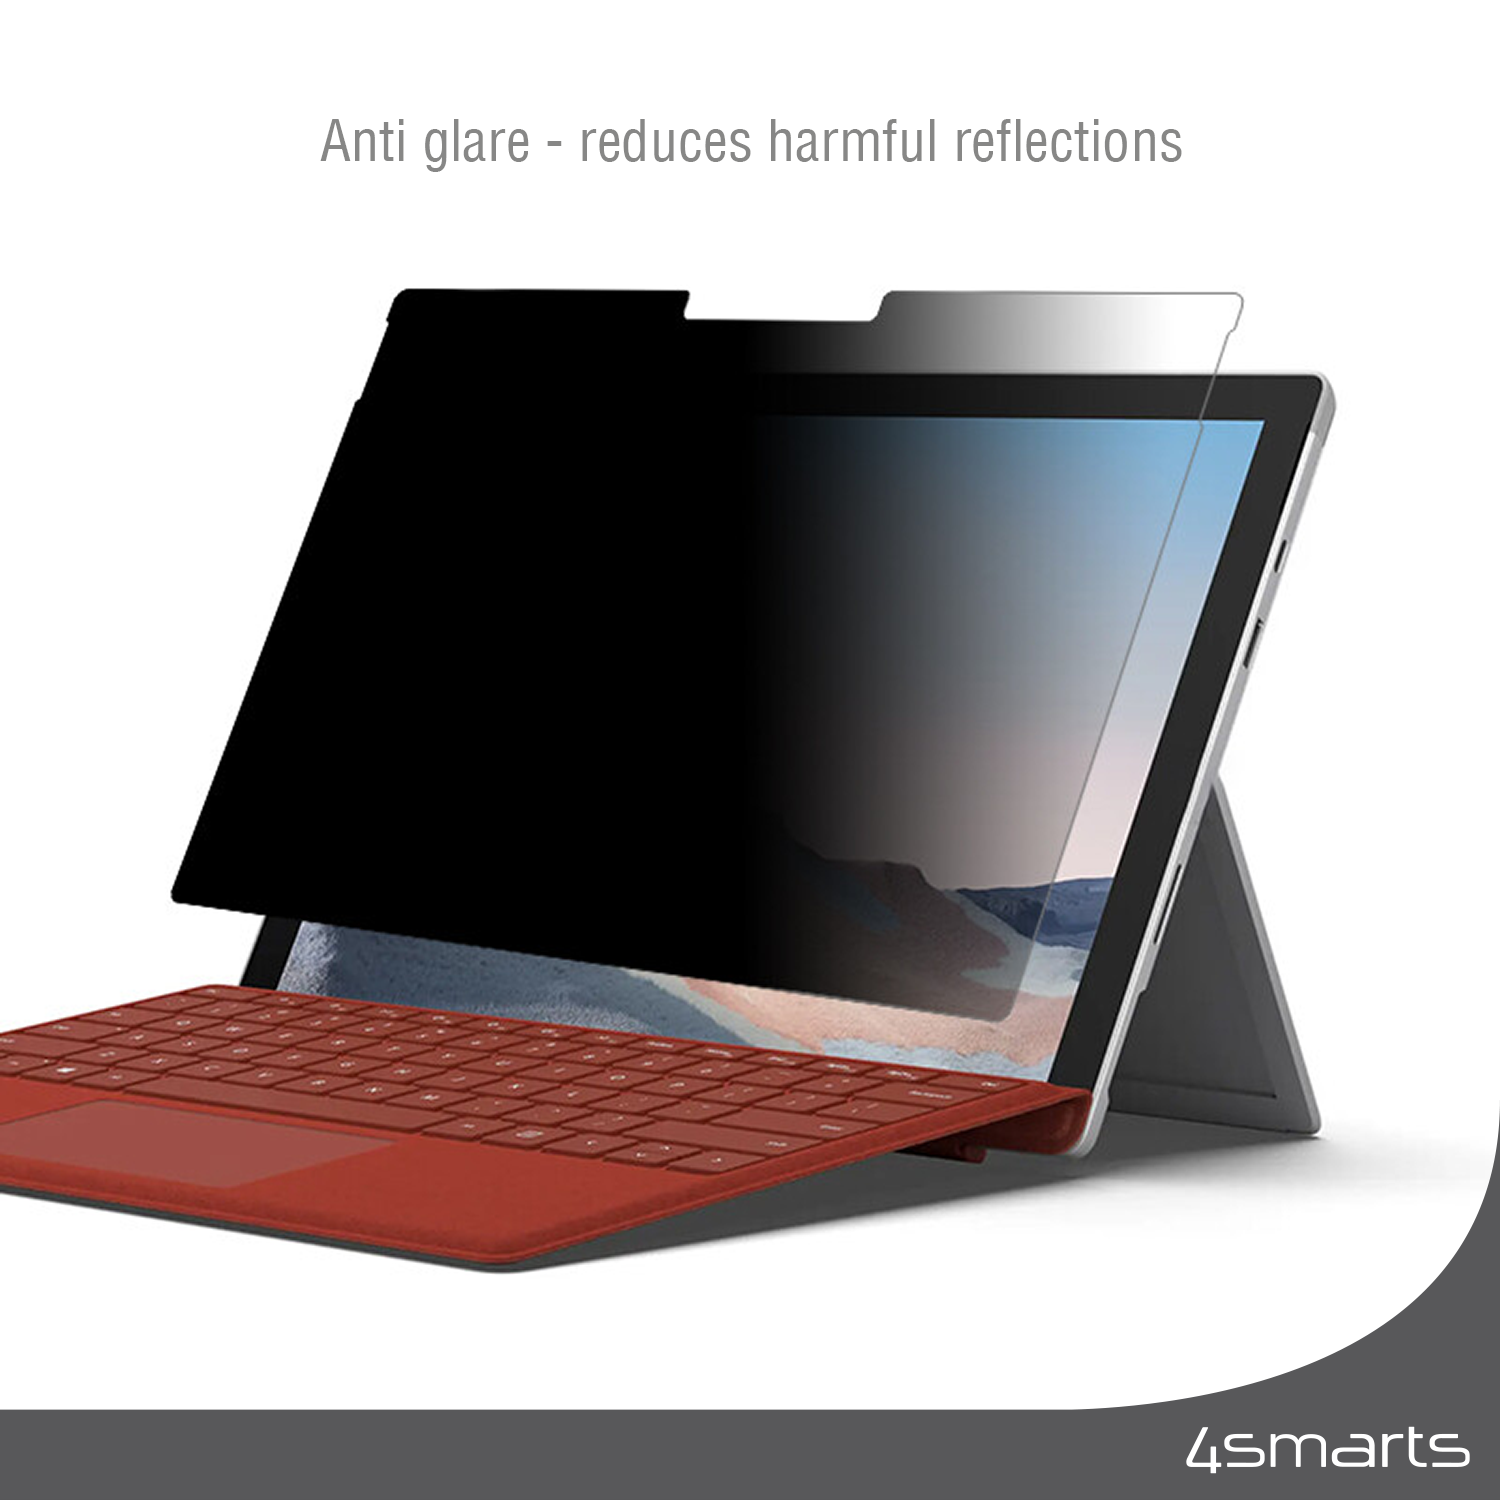 With 4smarts privacy screen protection your Microsoft Surface Pro 7+ display is also effectively protected from scratches and smudges.